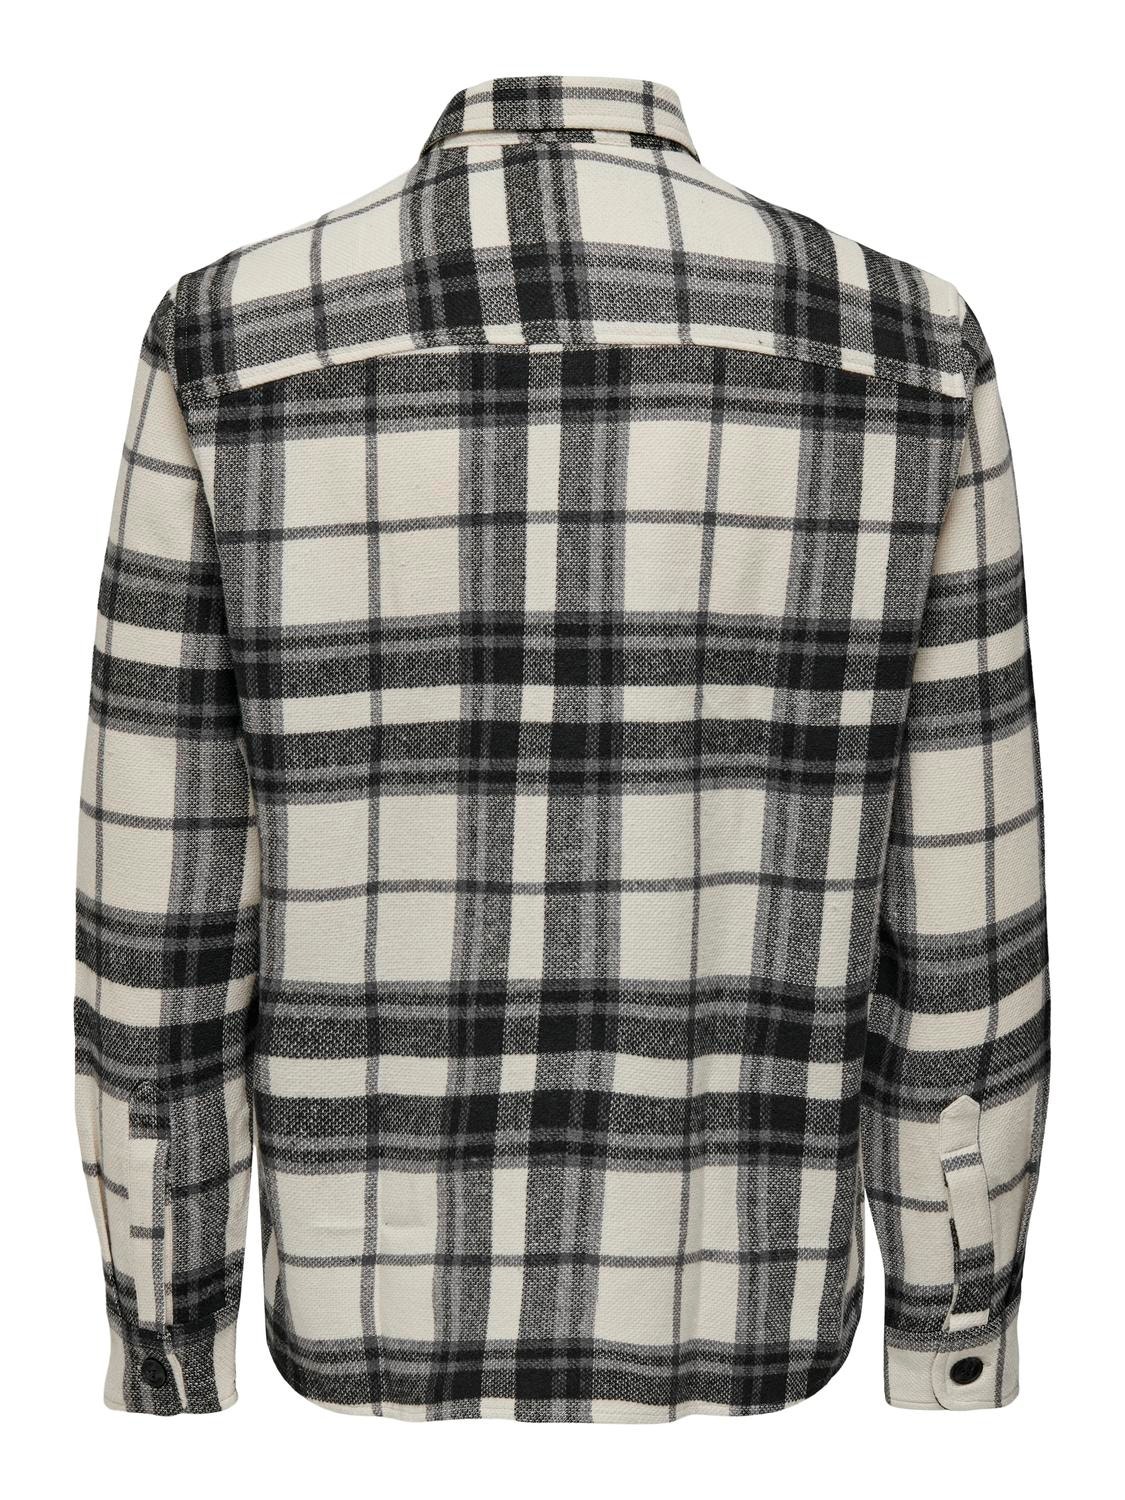 ONLY & SONS Checked shirt -Cloud Dancer - 22026313